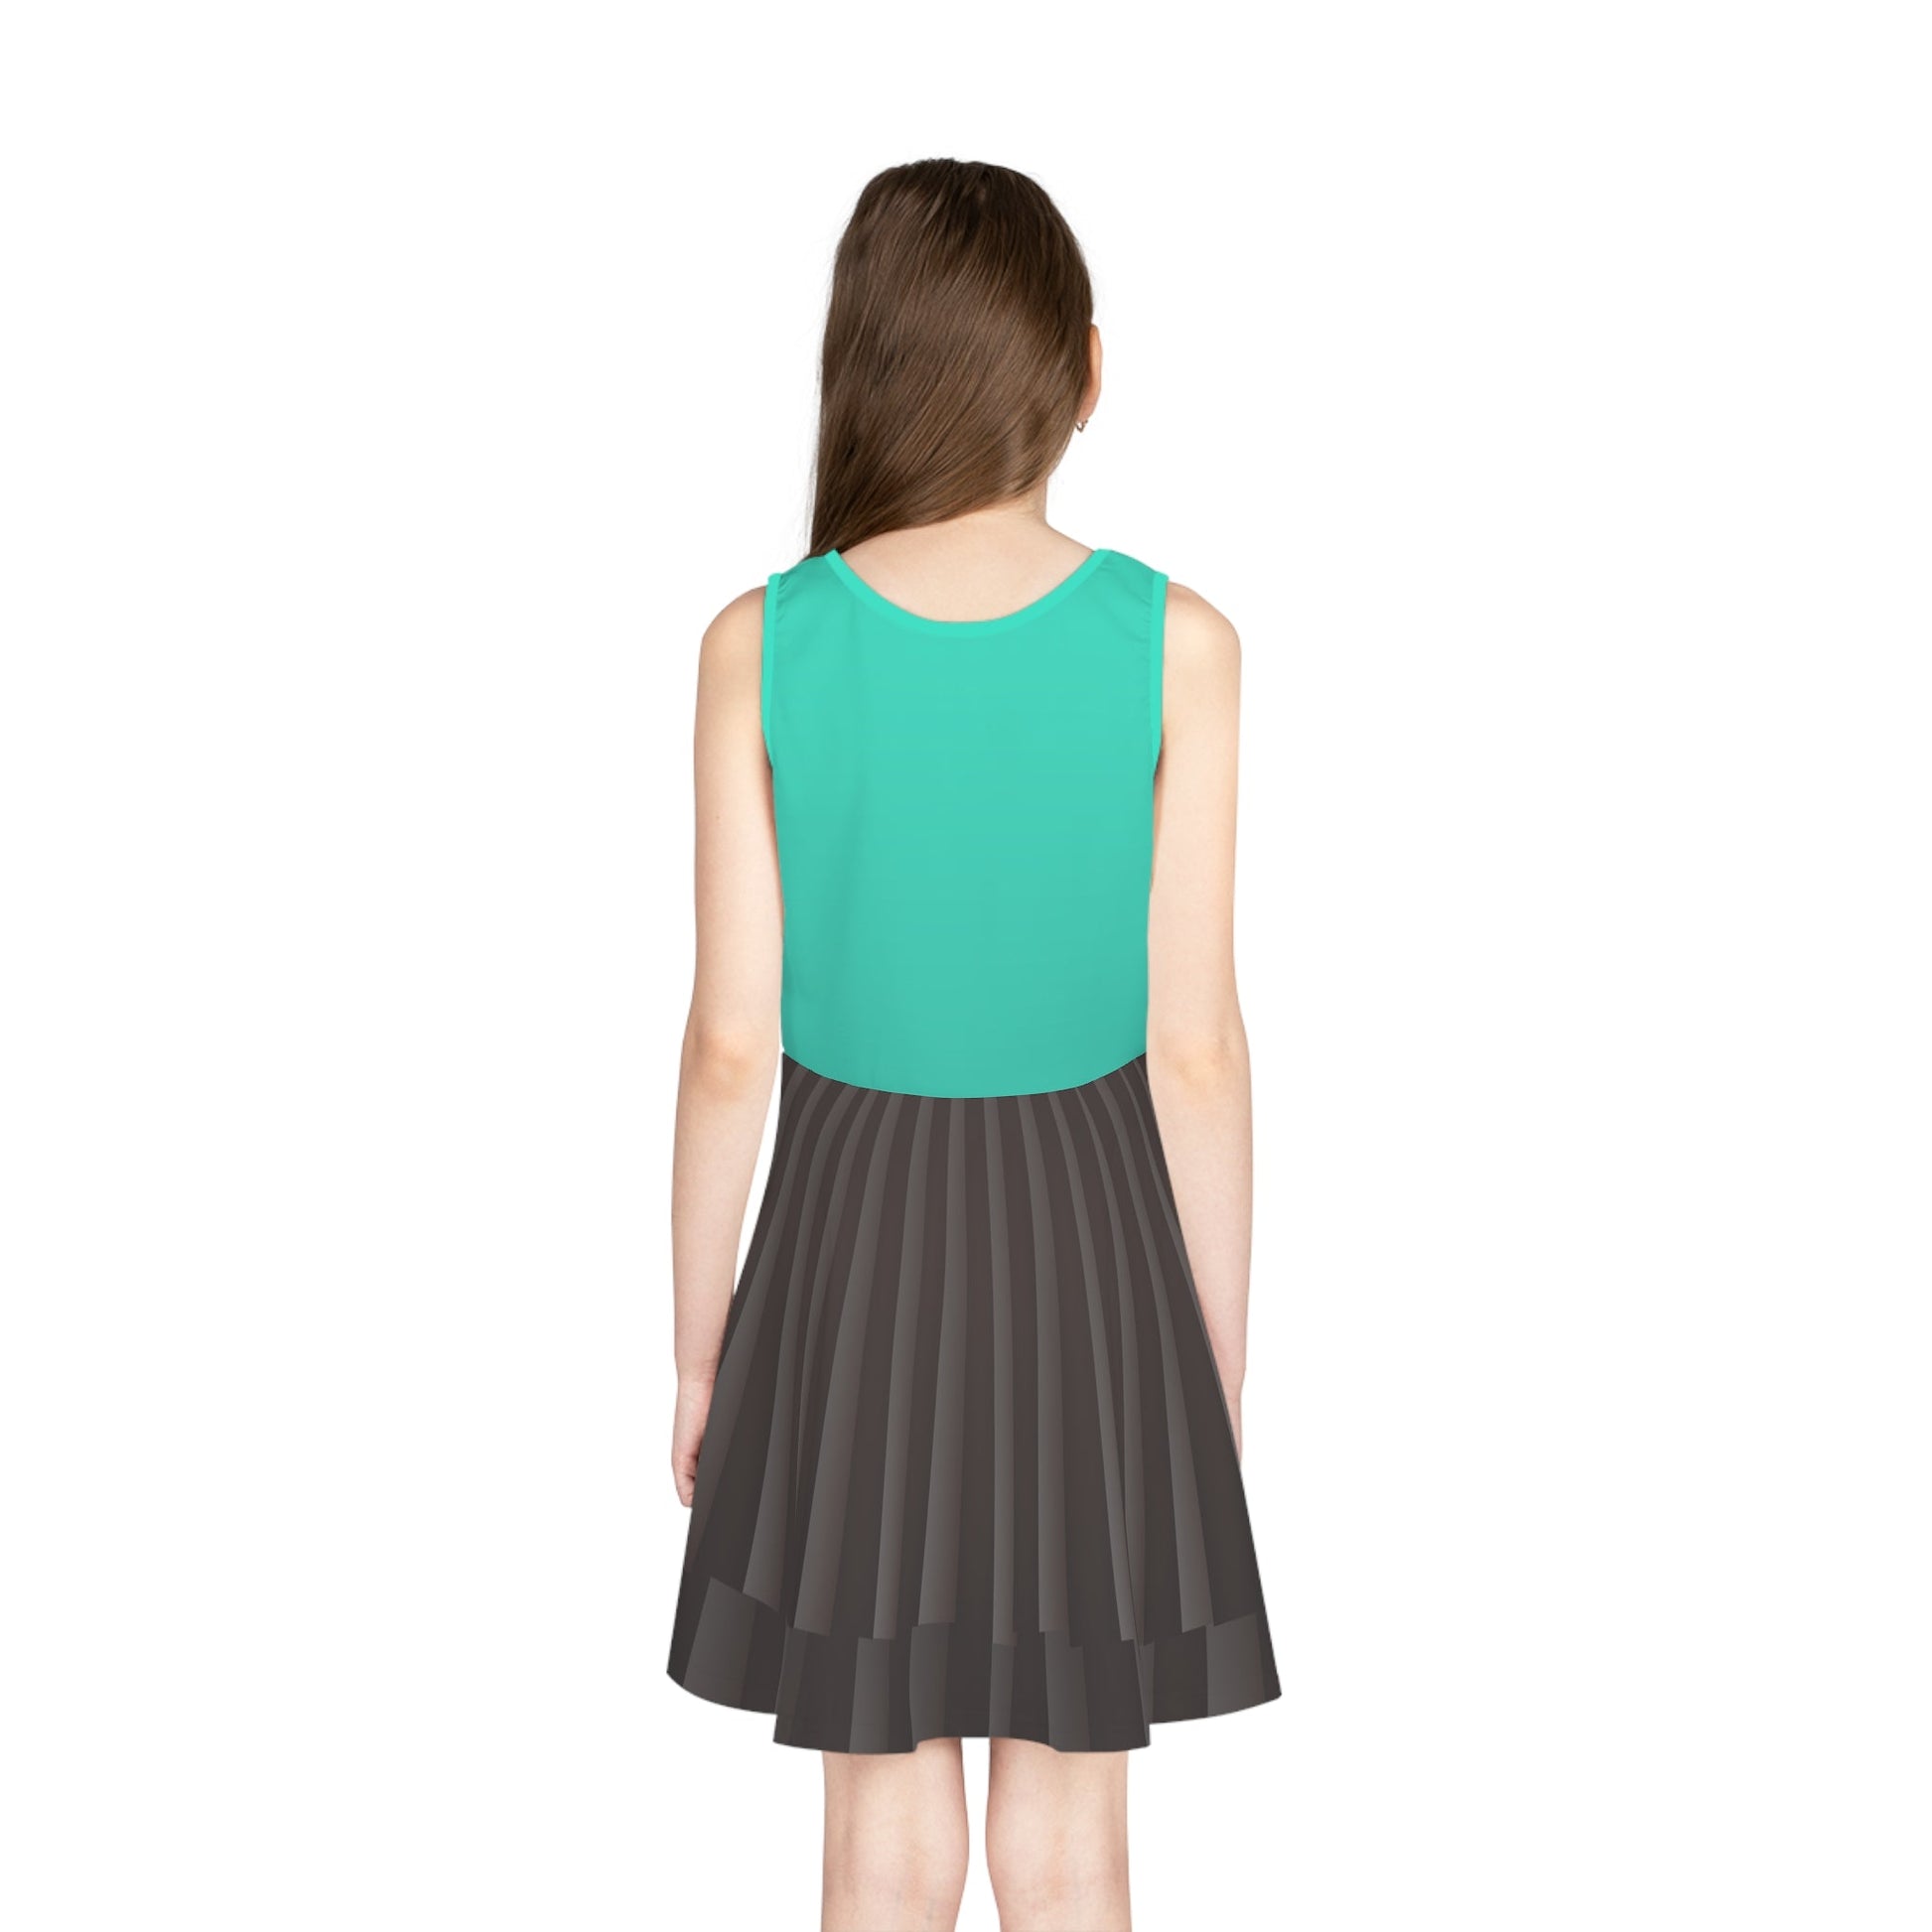 The Glitch Racer Girls' Sleeveless Sundress All Over PrintAOPAOP Clothing#tag4##tag5##tag6#